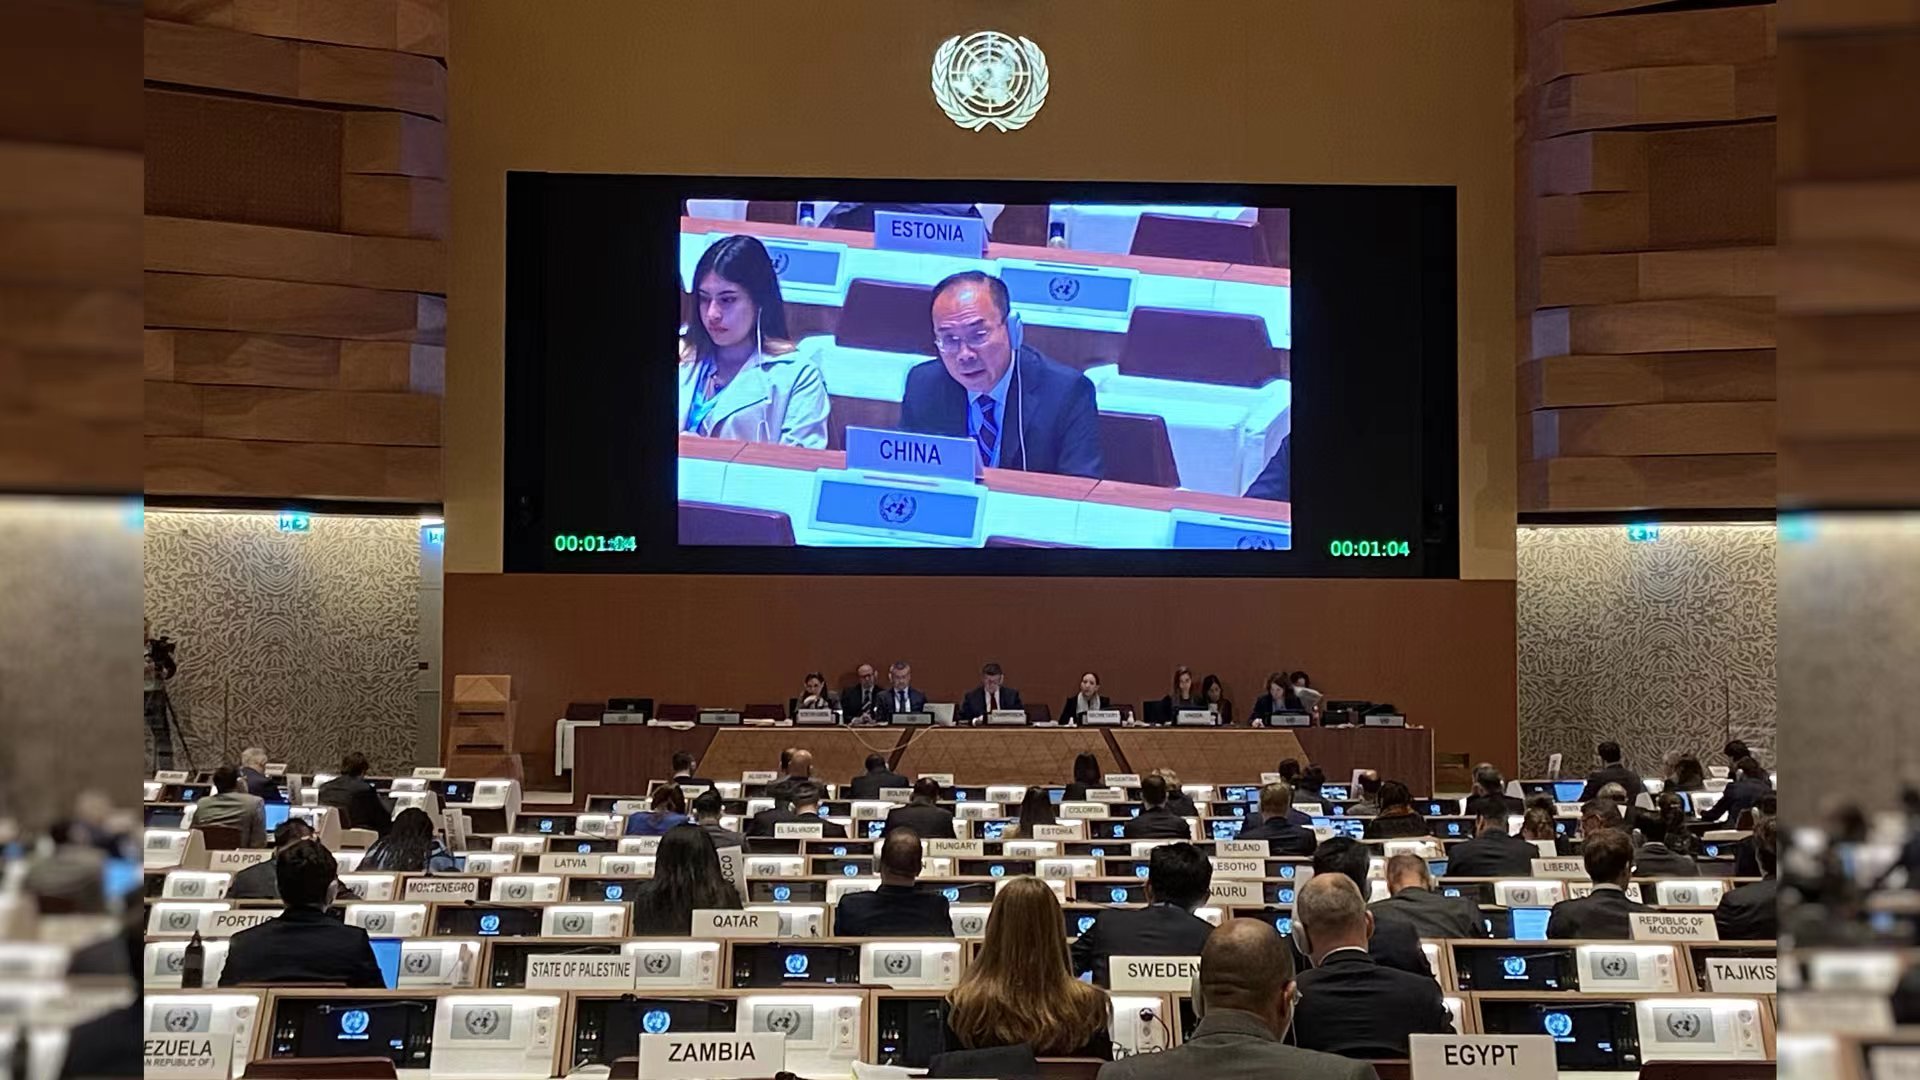 Li Song, China's ambassador for disarmament affairs, speaks at the 2022 Meeting of the High Contracting Parties to the Convention on Certain Conventional Weapons in Geneva, Switzerland, November 16, 2022. /China's mission to UN office at Geneva